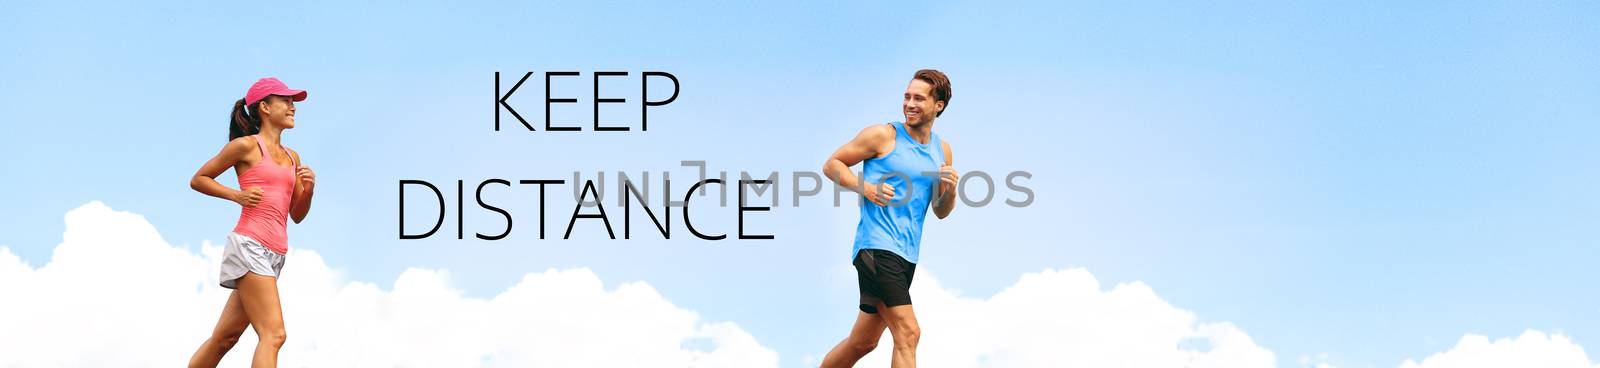 KEEP DISTANCE social distancing COVID-19 people walking running exercising outdoor in city. Healthy active runners man woman jogging header summer lifestyle banner.